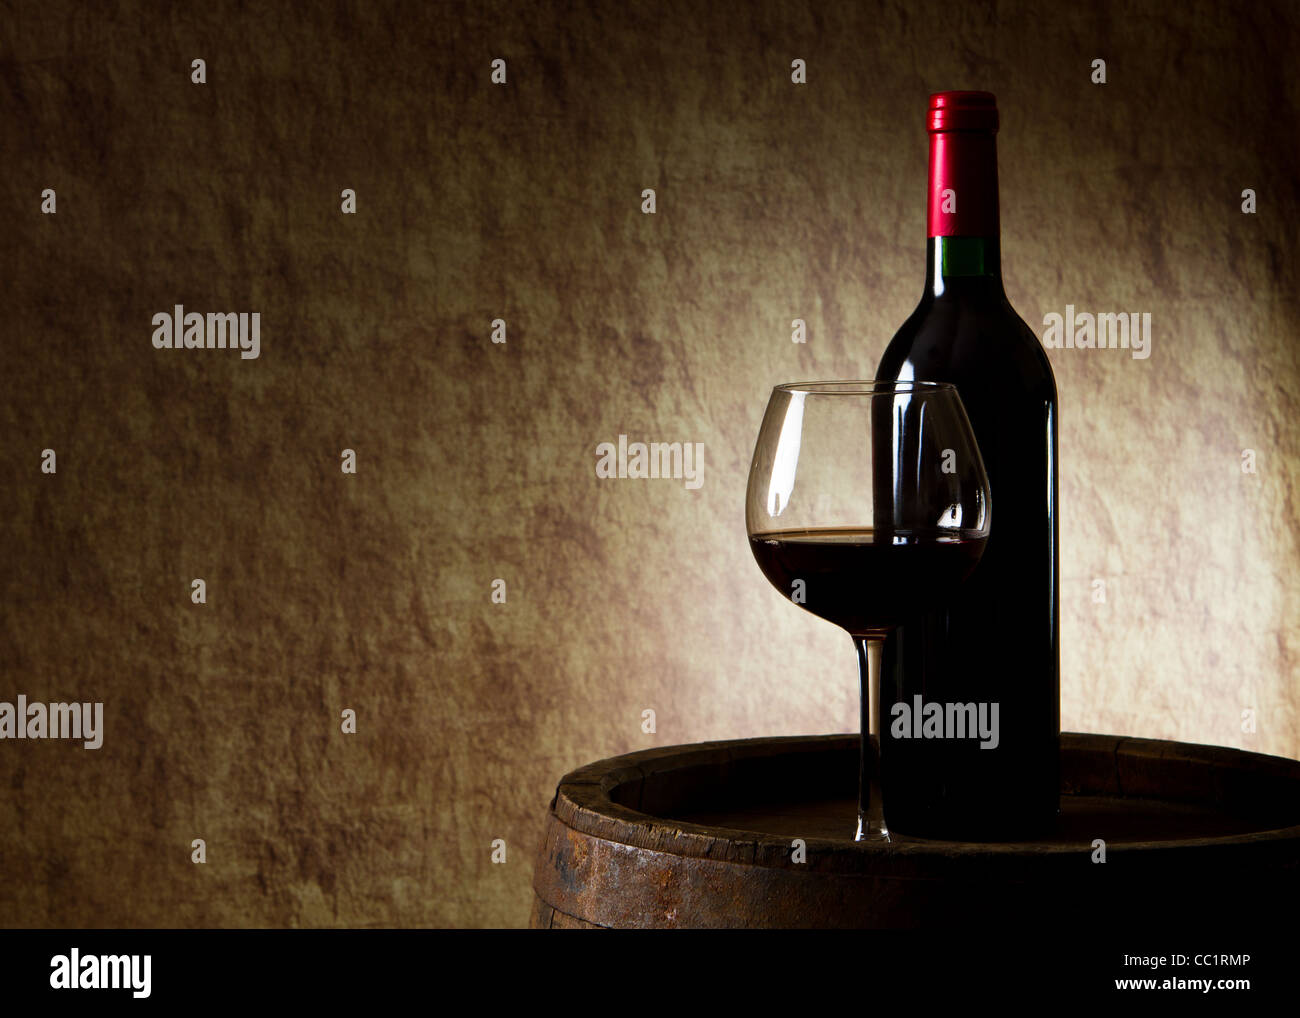 the still life with red wine, bottle, glass and old barrel Stock Photo